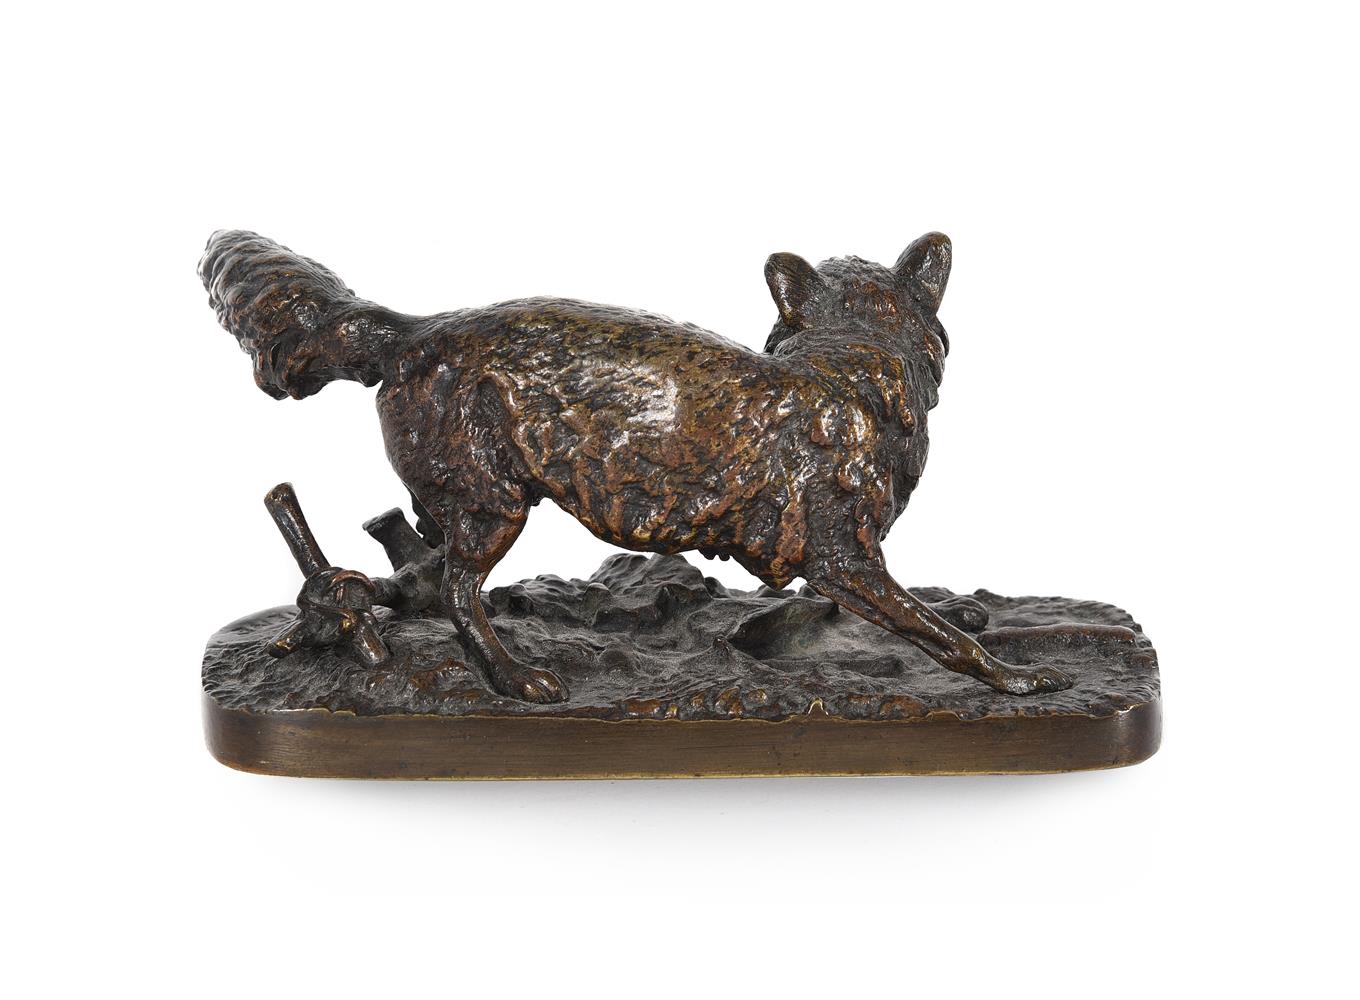 AFTER PIERRE-JULES MÊNE (1810-1879), AN ANIMALIER BRONZE OF A VIXEN FOX, FRENCH, LATE 19TH CENTURY - Image 2 of 4